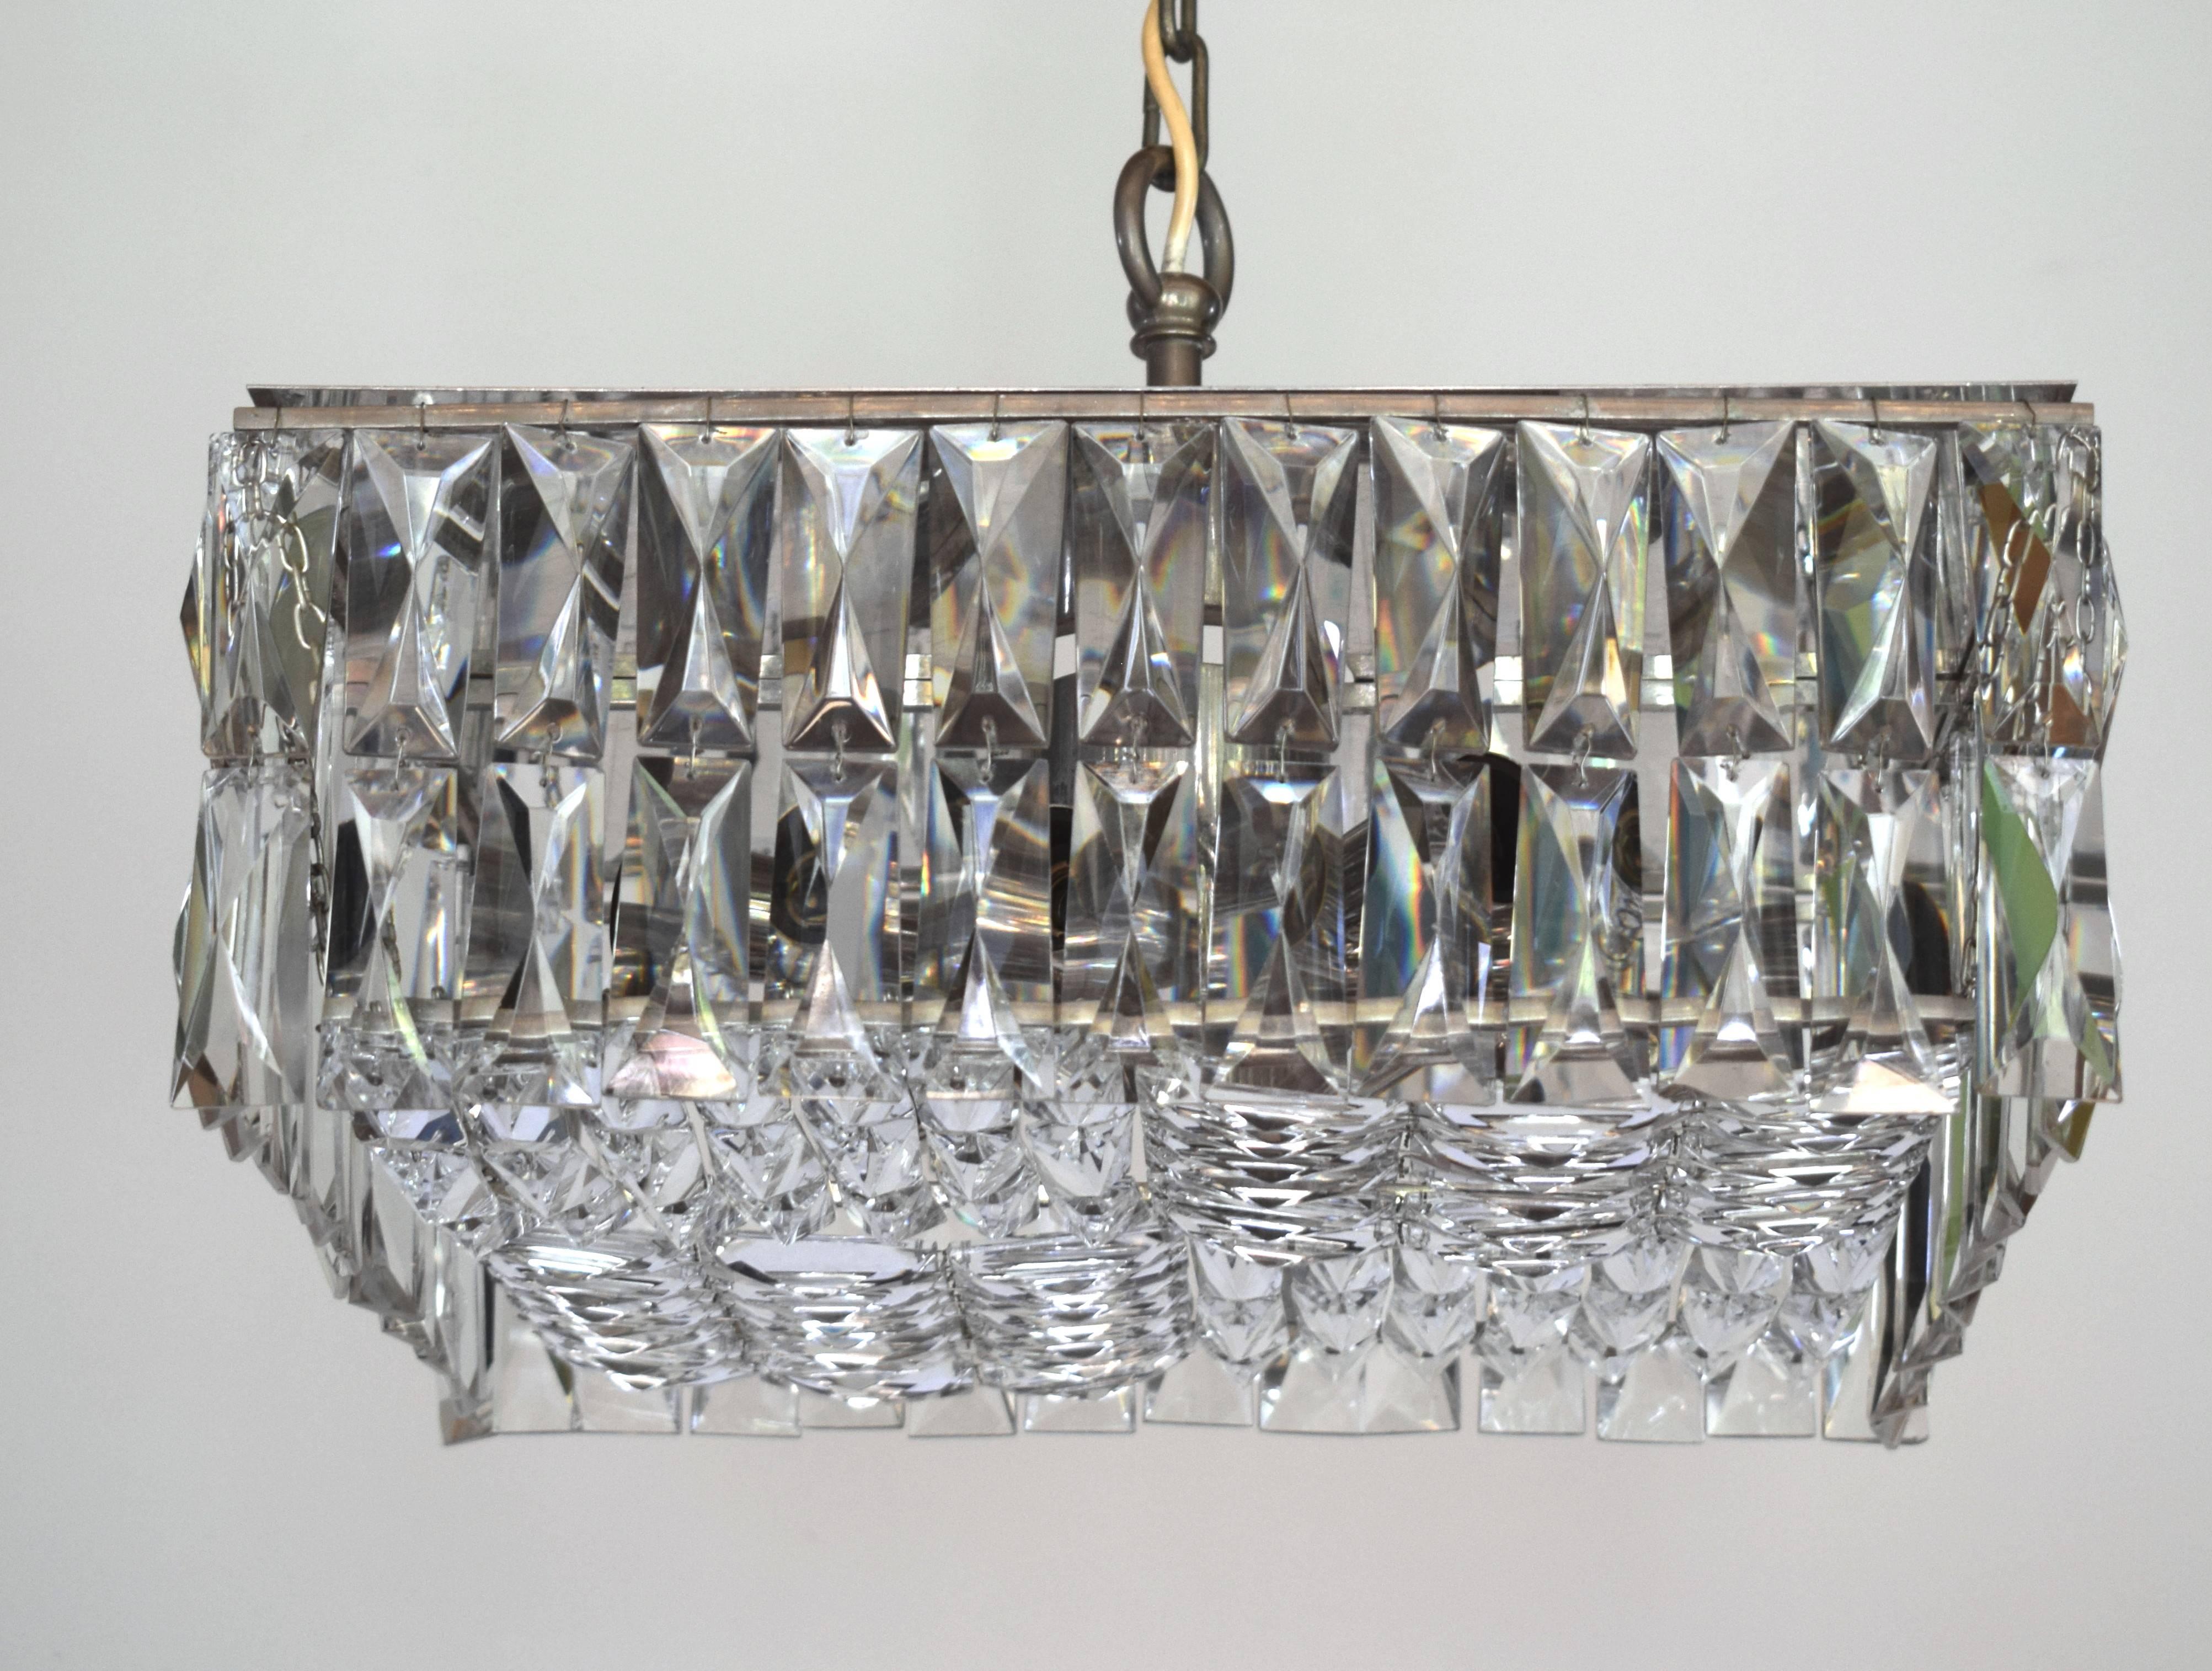 Steel construction with eight lights and with 40 X 40cm (15.74 X 15.74 in) hand-cut crystal elements from the 1960s made by Bakalowits & Sohne.
Very rare!